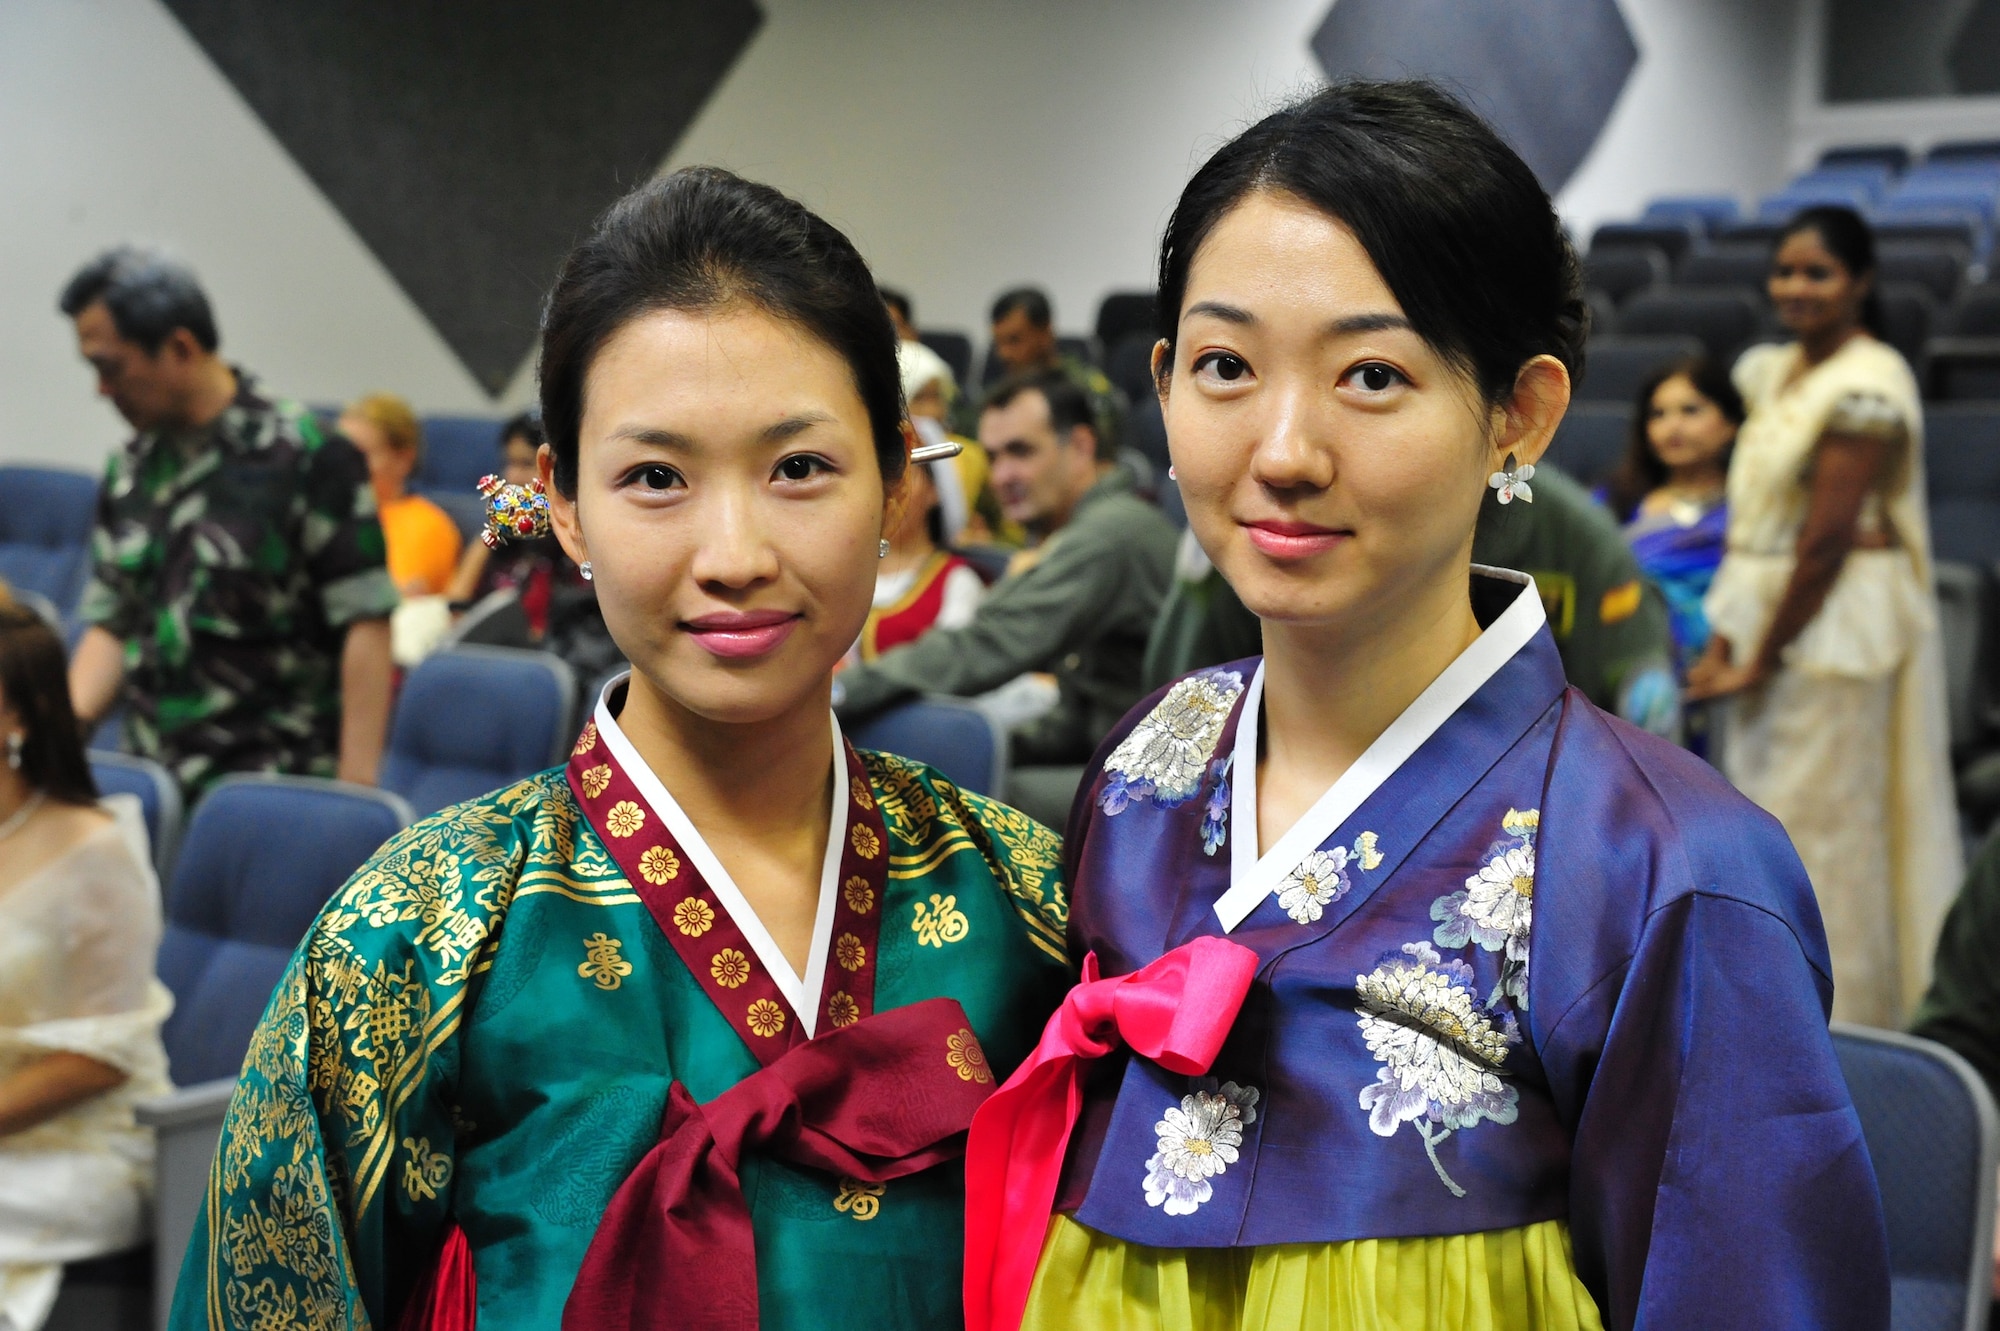 Soojin Choi and Lin Jung display their Hanbok, South Korea's traditional dress wear during the International Family Orientation Program graduation on July 3. IFOP classes are designed to familiarize spouses, children and other family members of International Officers with the customs and culture of the local area and the United States, and gives them a chance to meet and socialize with each other. (U.S. Air Force photo by Airman 1st Class William Blankenship)